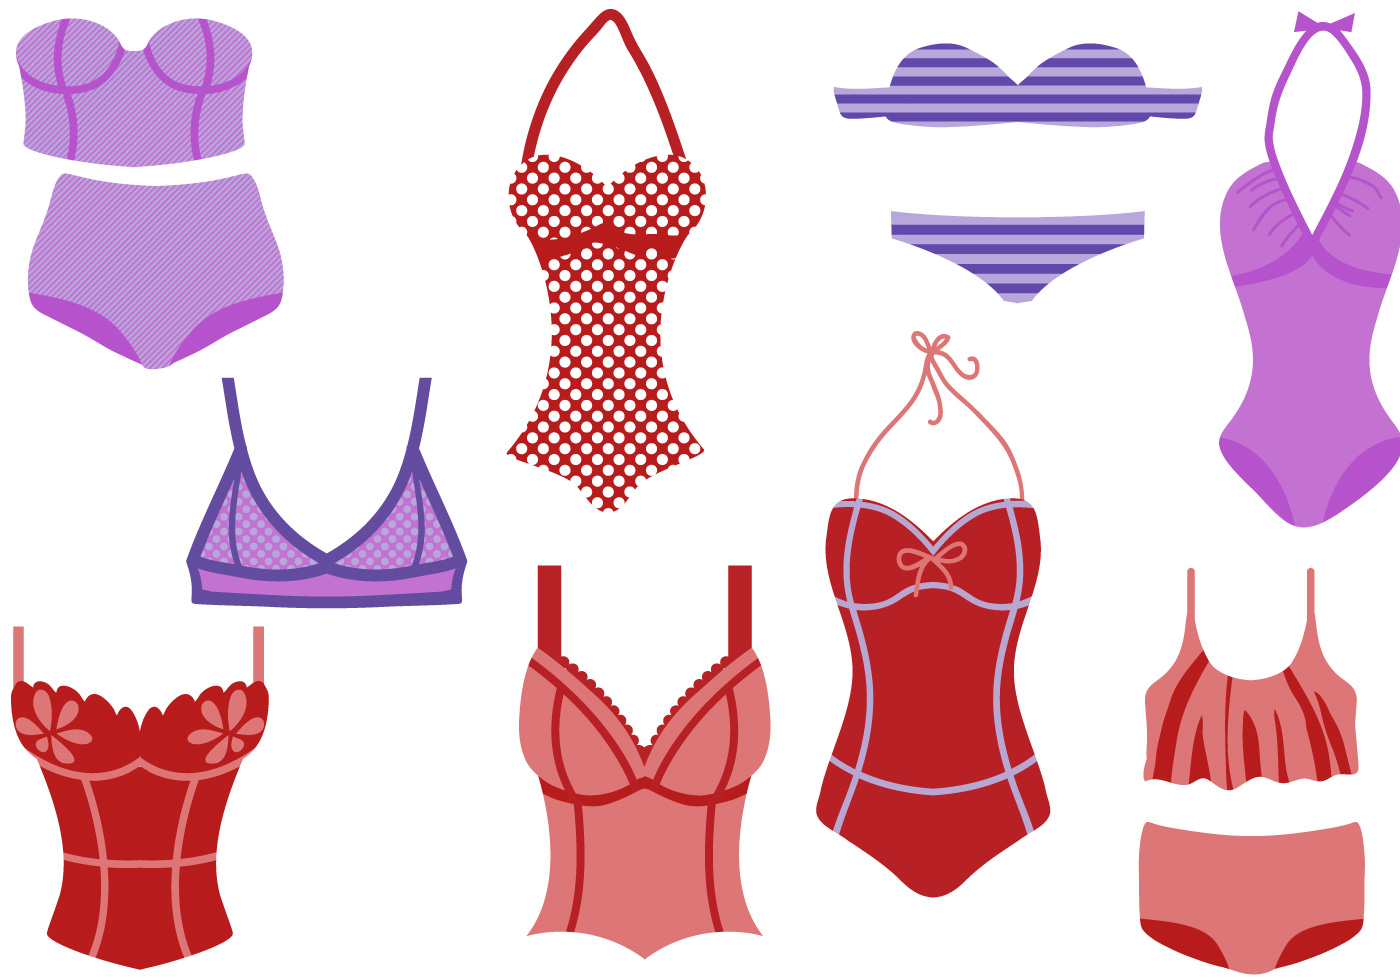 Browse 621 incredible Bathing Suit vectors, icons, clipart graphics, and ba...